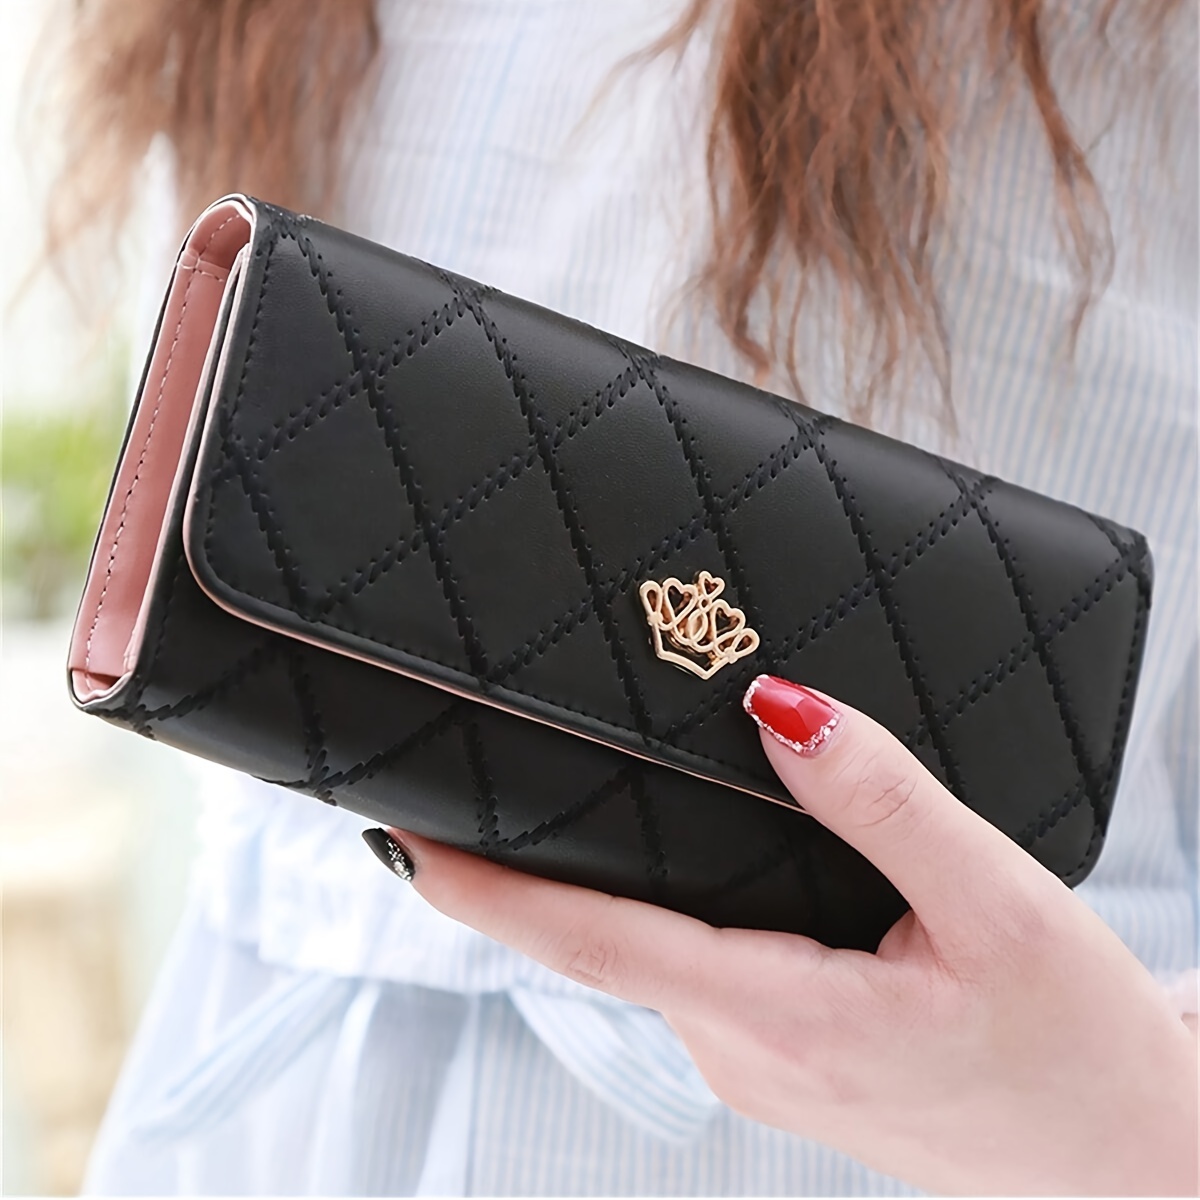 

Fashion Argyle Embroidery Long Wallet, Women's Flap Mobile Phone Bag, Pu Leather Coin Purse Clutch Bag